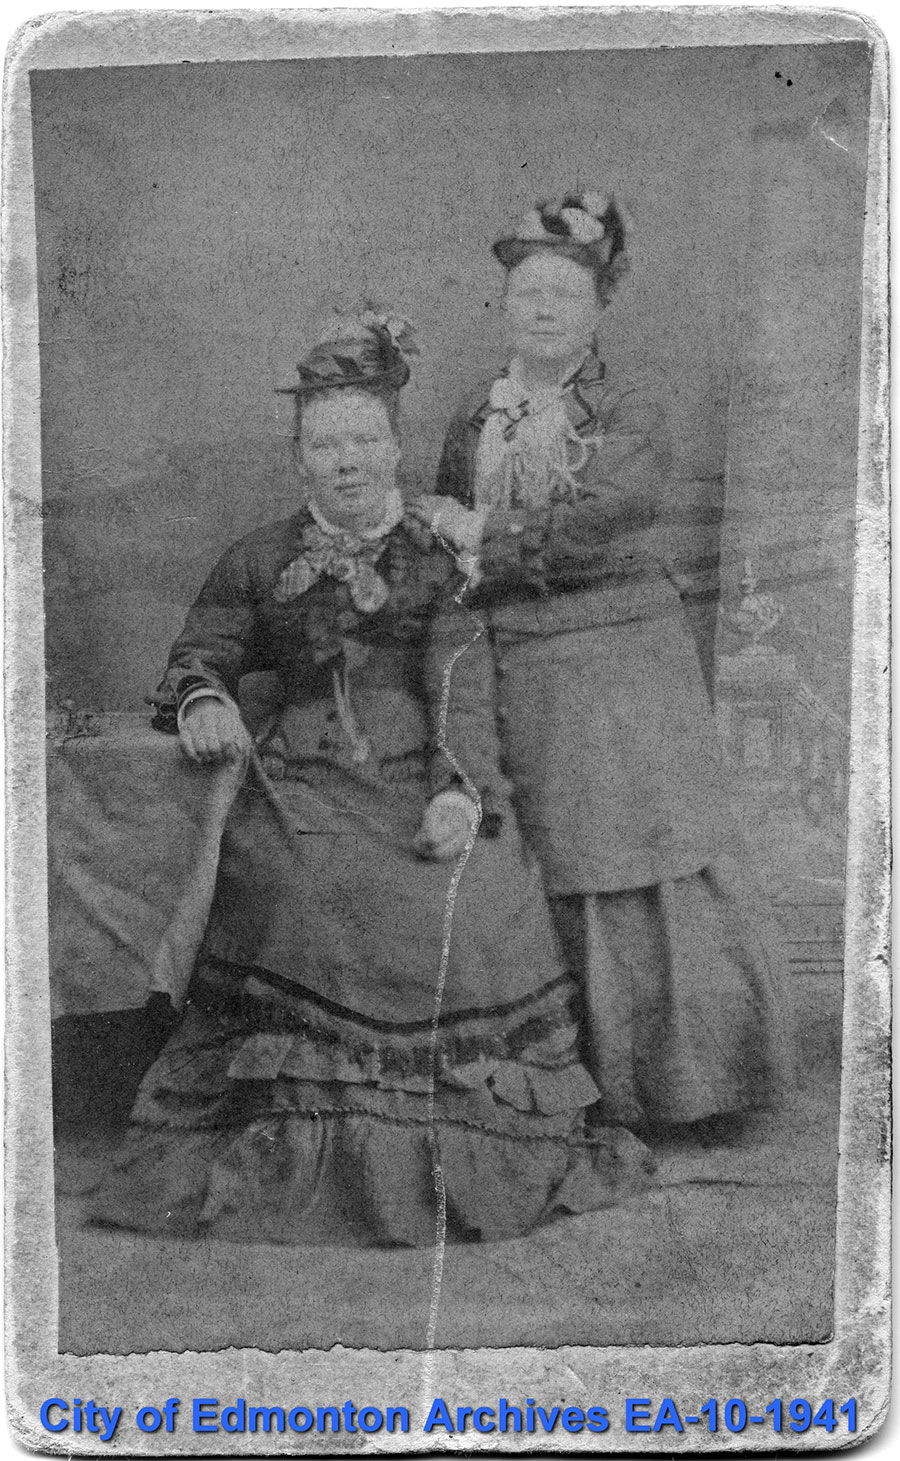 Mary and Ellen Walter